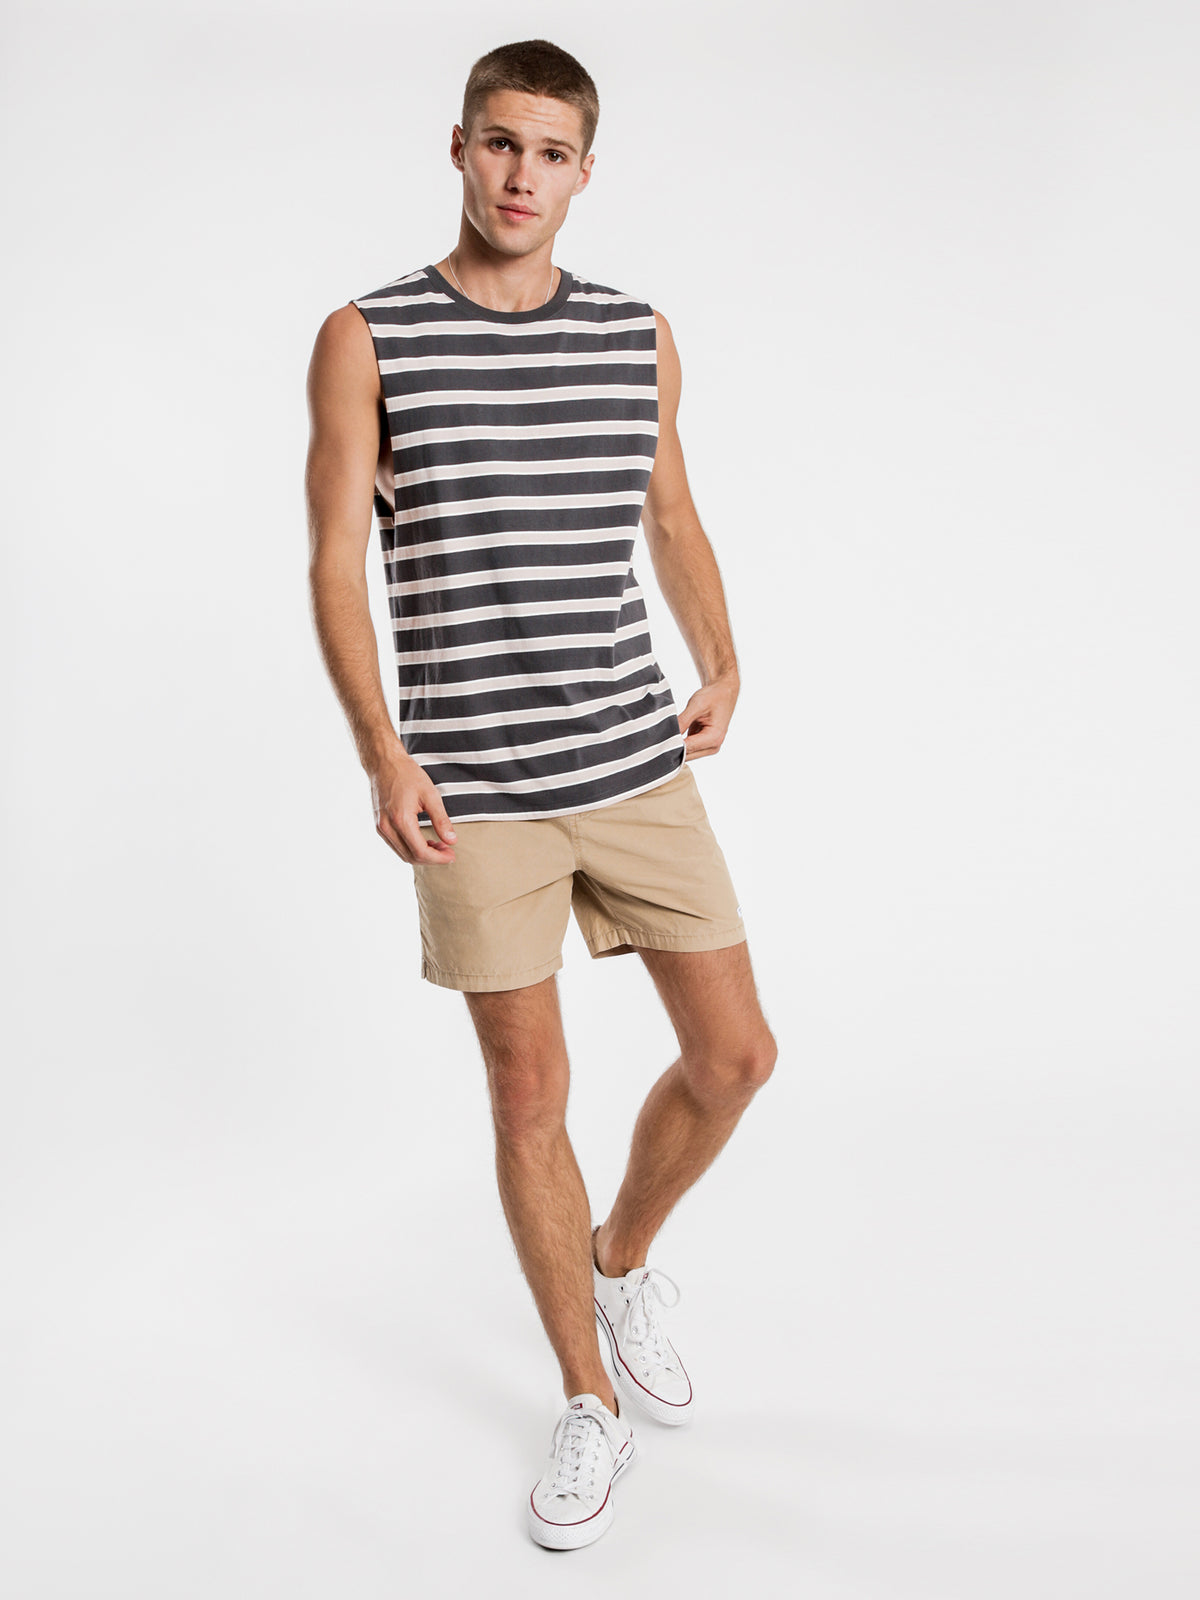 Southport Stripe Muscle in Washed Black Stripe